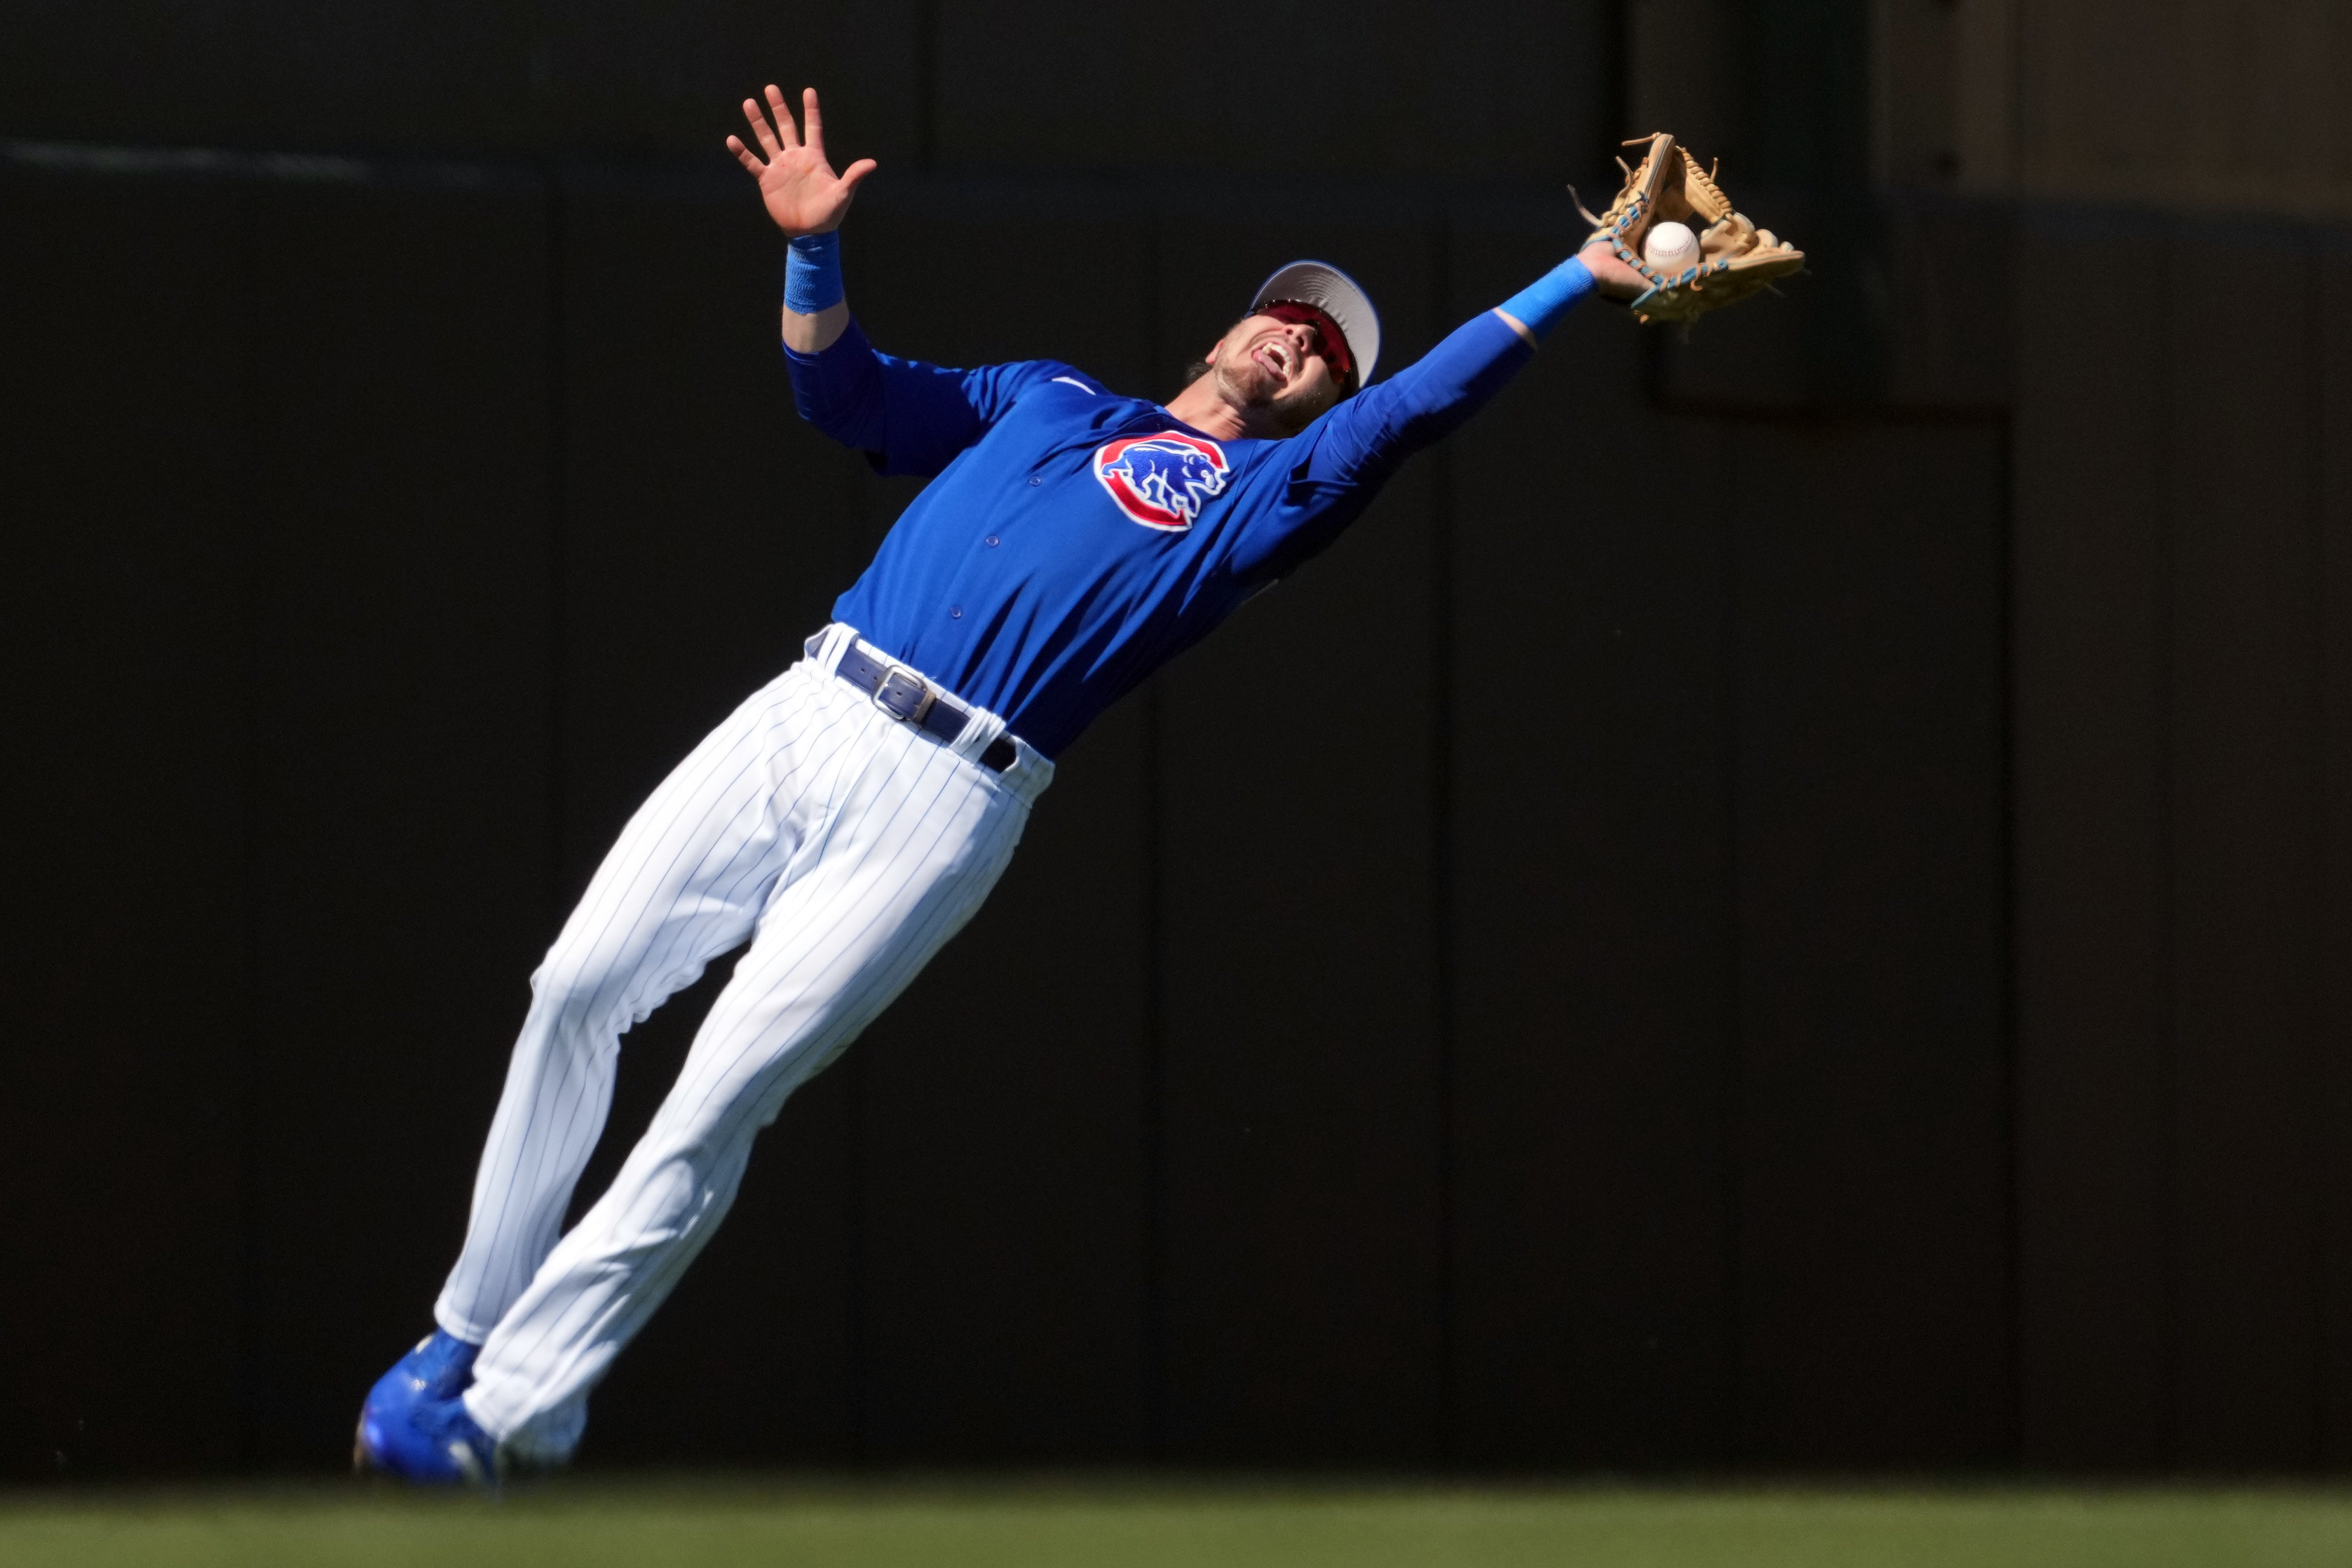 What are Cubs getting in Zach McKinstry trade?